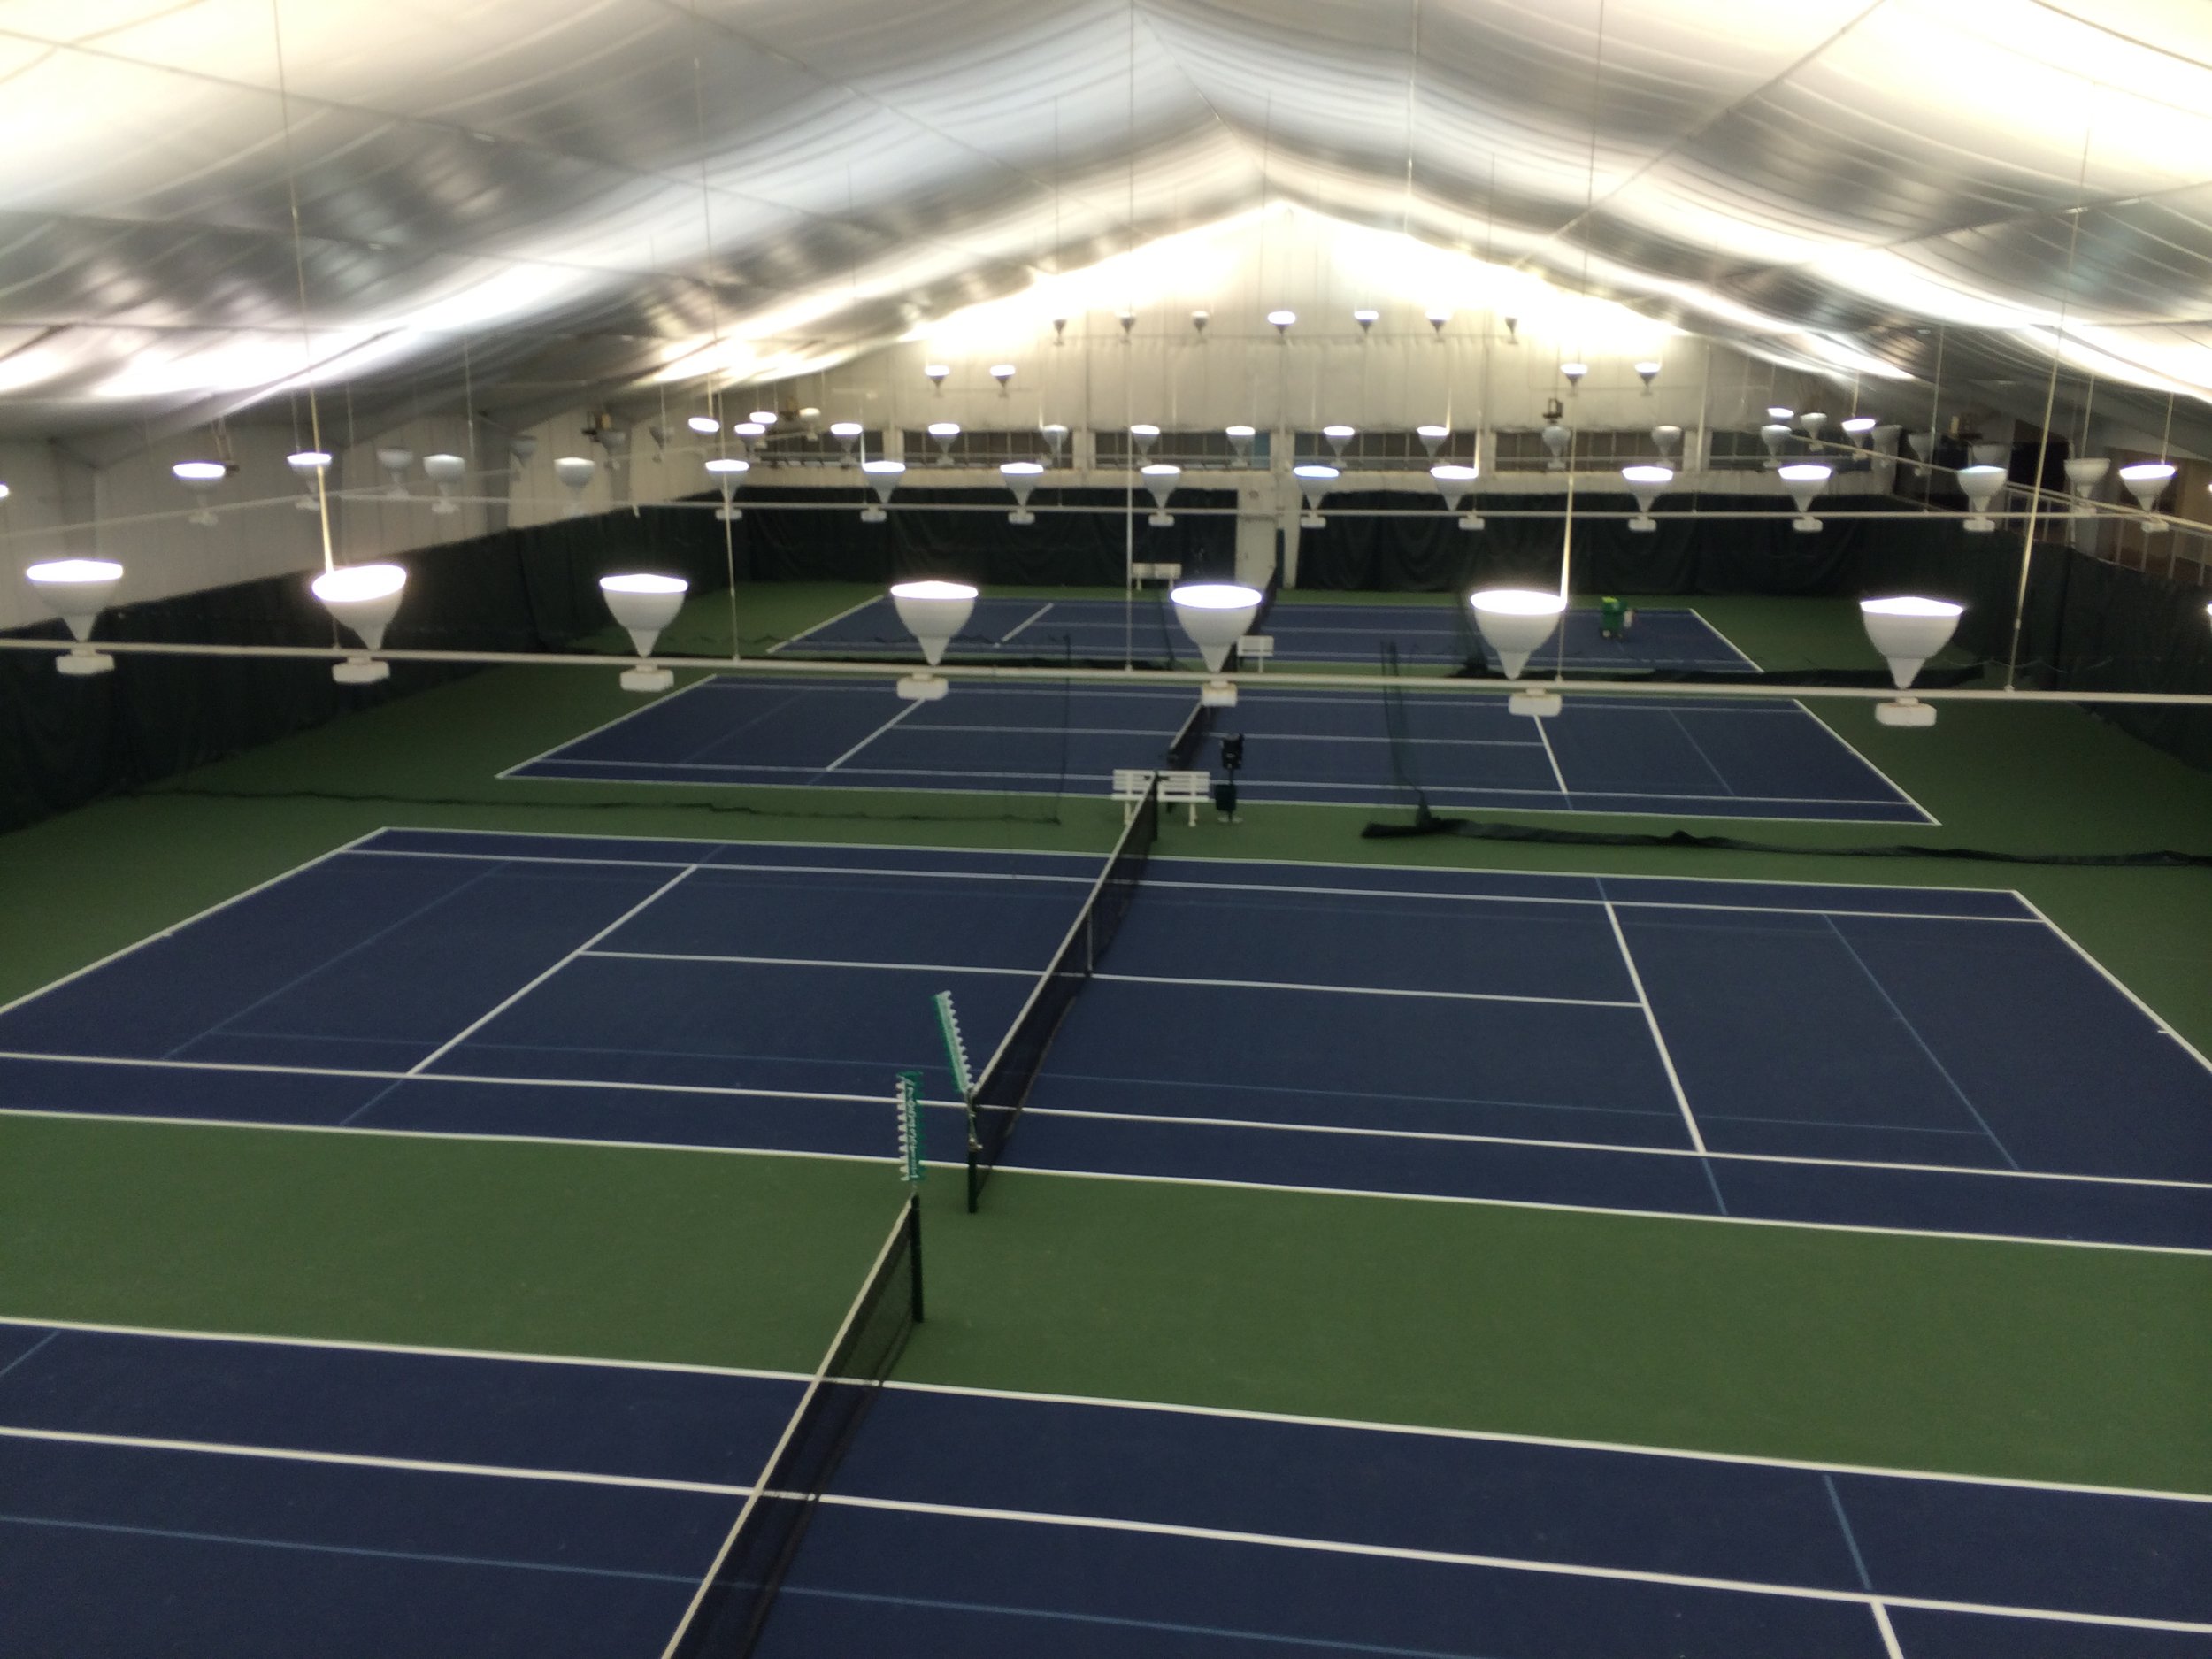 Cherokee Country Club Indoor, Knoxville, TN